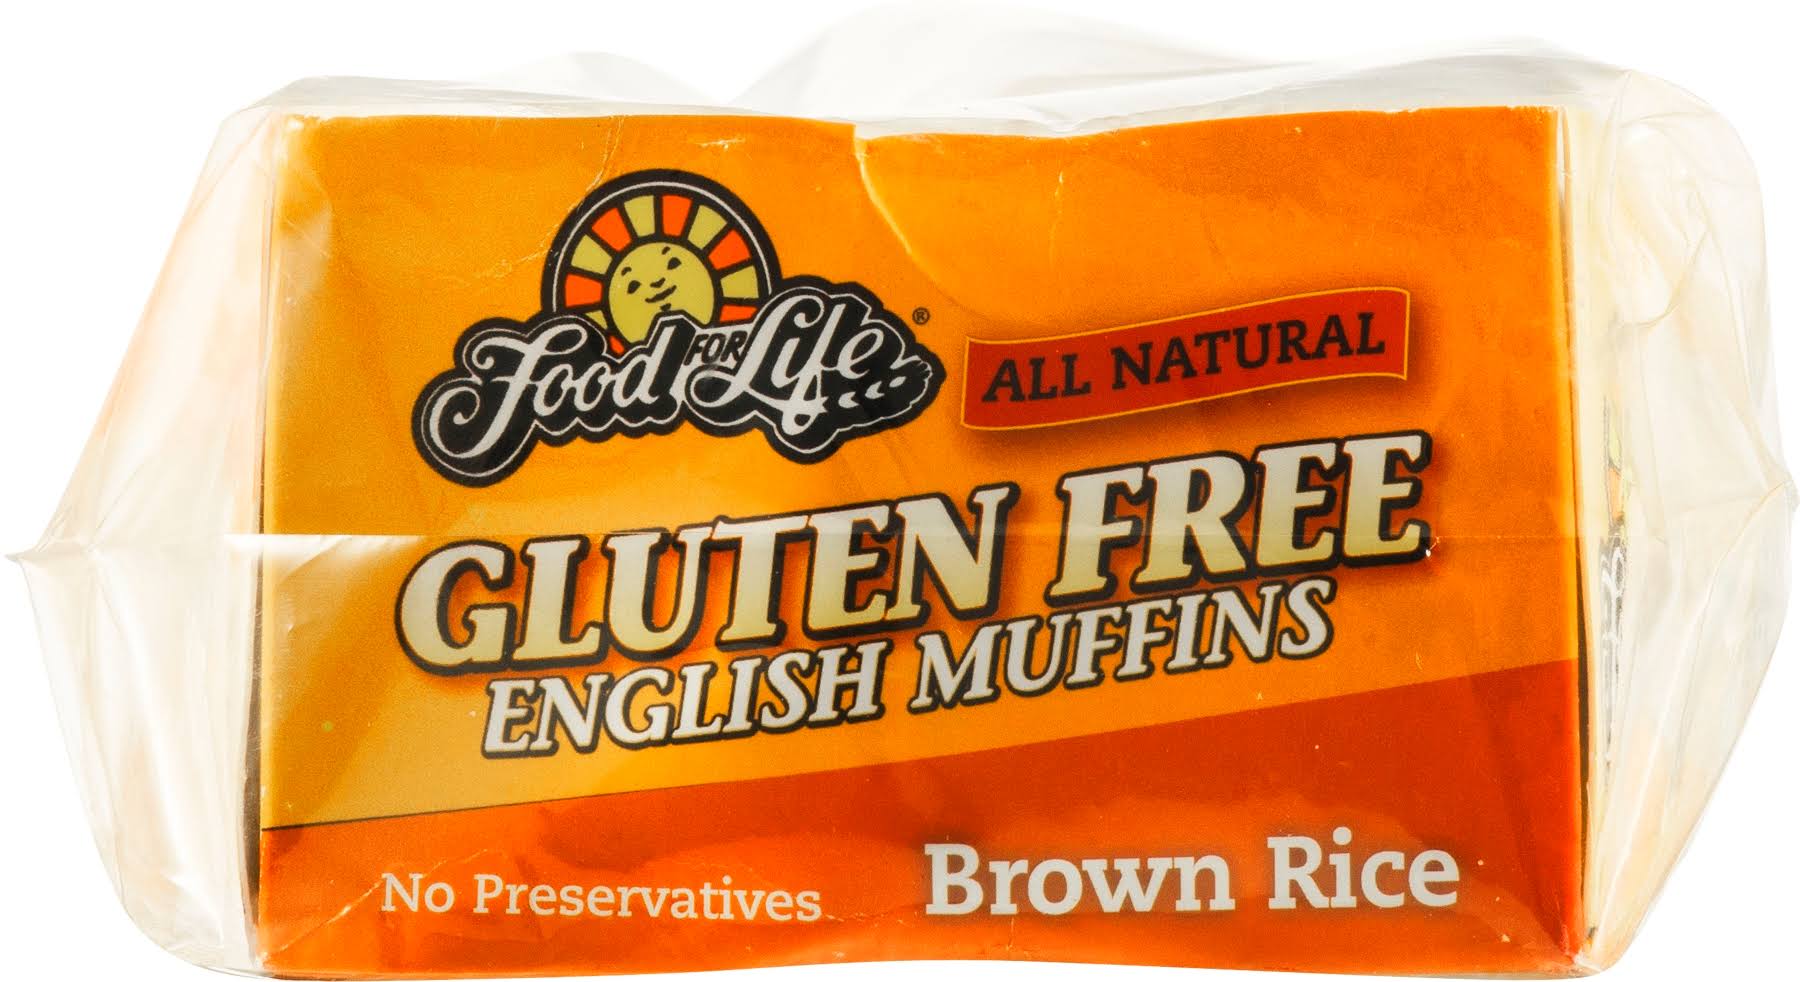 Food For Life: Gluten Free English Muffins Brown Rice, 18 oz